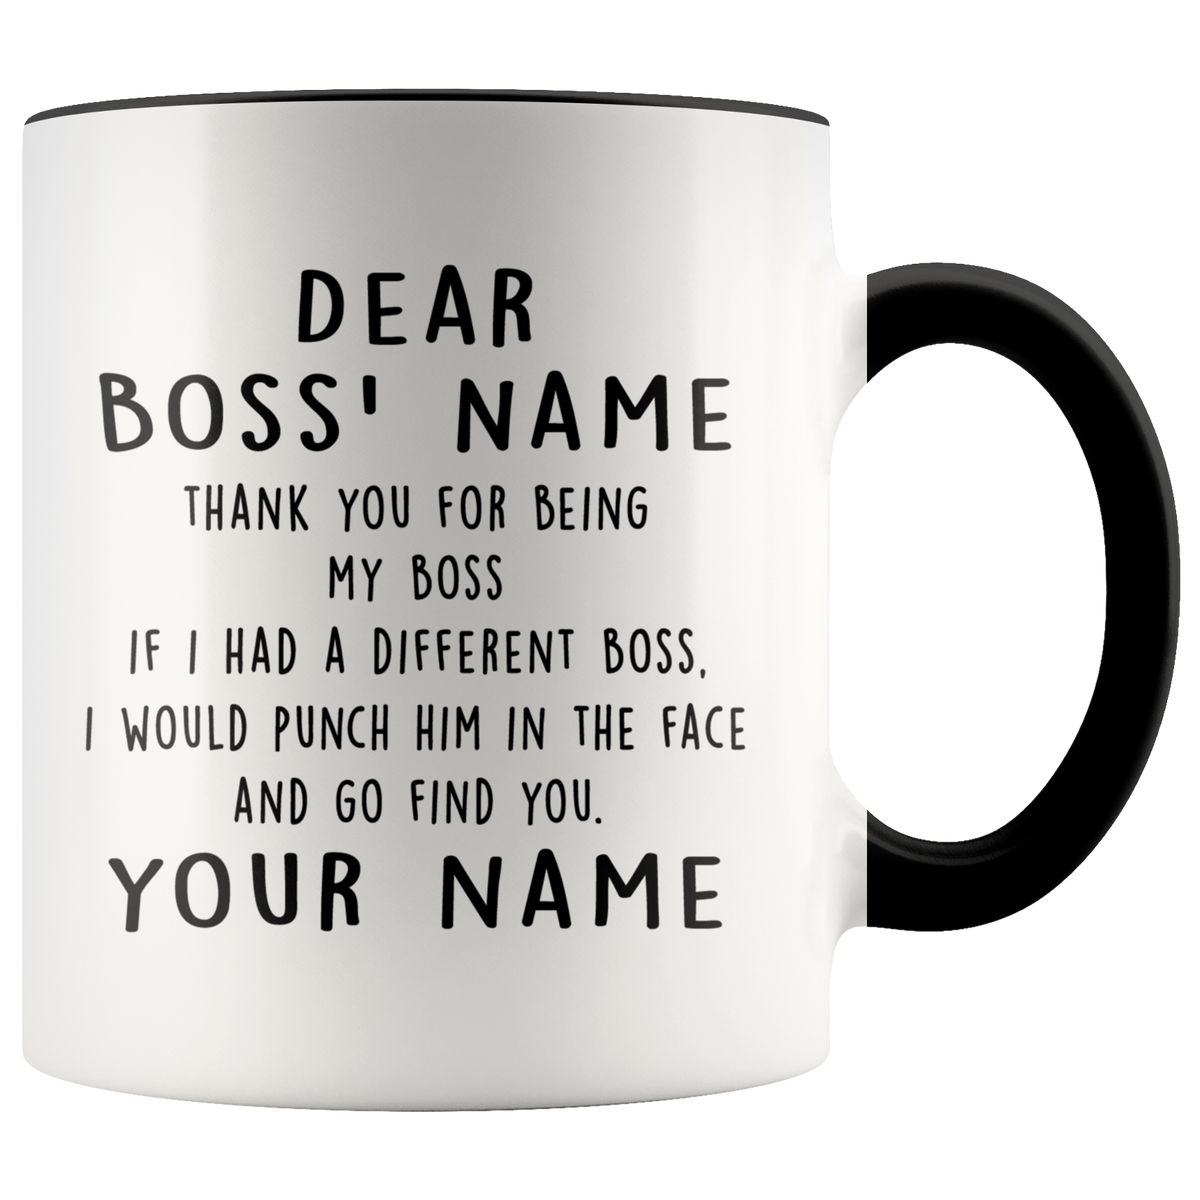 Personalized Funny Mug Gift For Boss - If I Had A Different Boss Accent Coffee Mug 11oz (black)